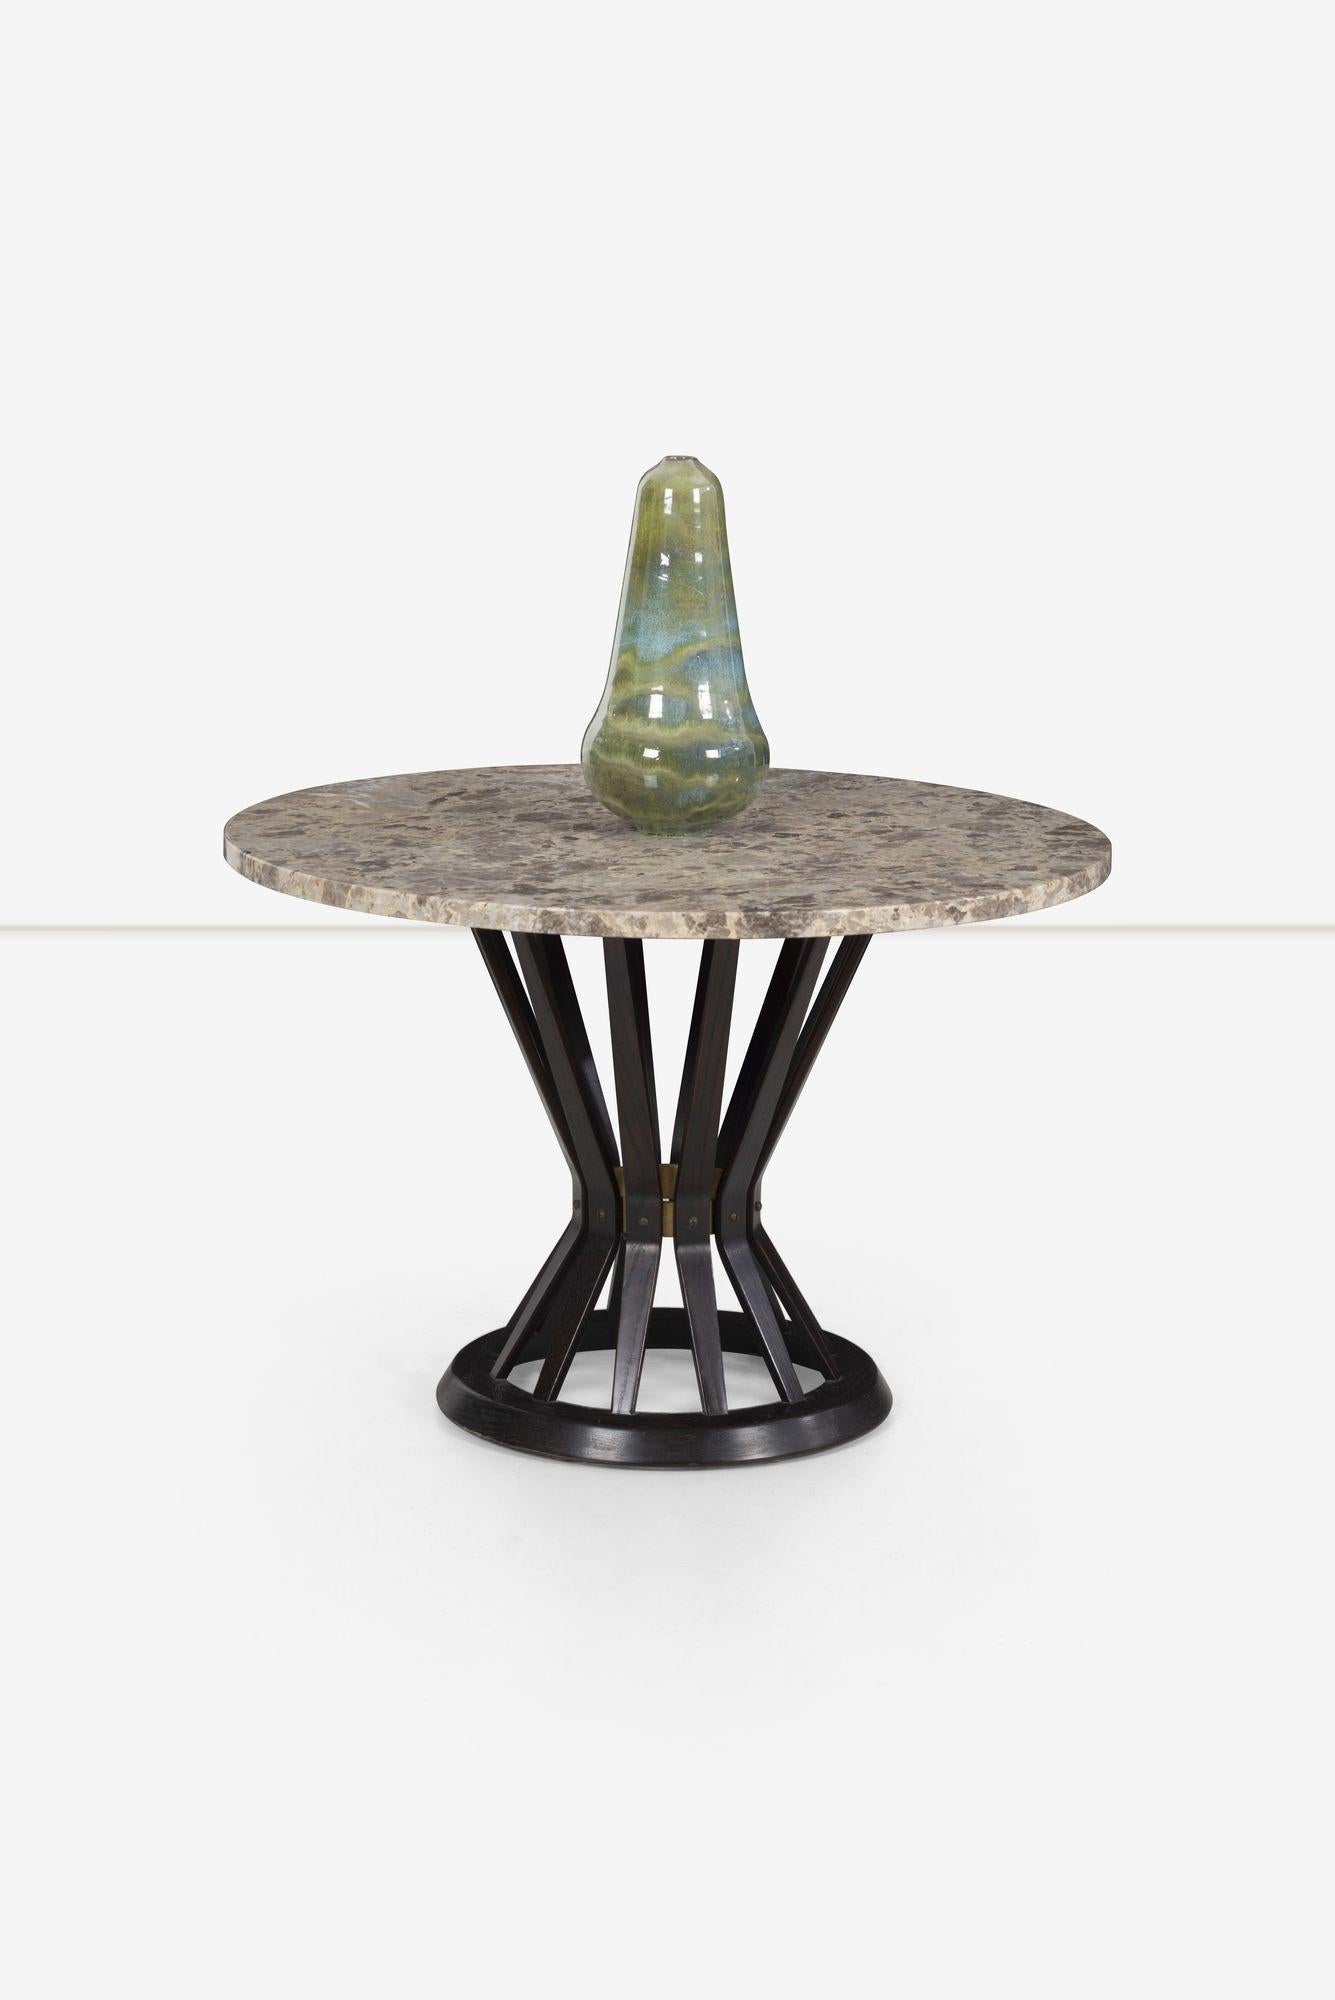 Mid-20th Century Edward Wormley for Dunbar Sheaf of Wheat Table, Terrazzo Marble Top For Sale